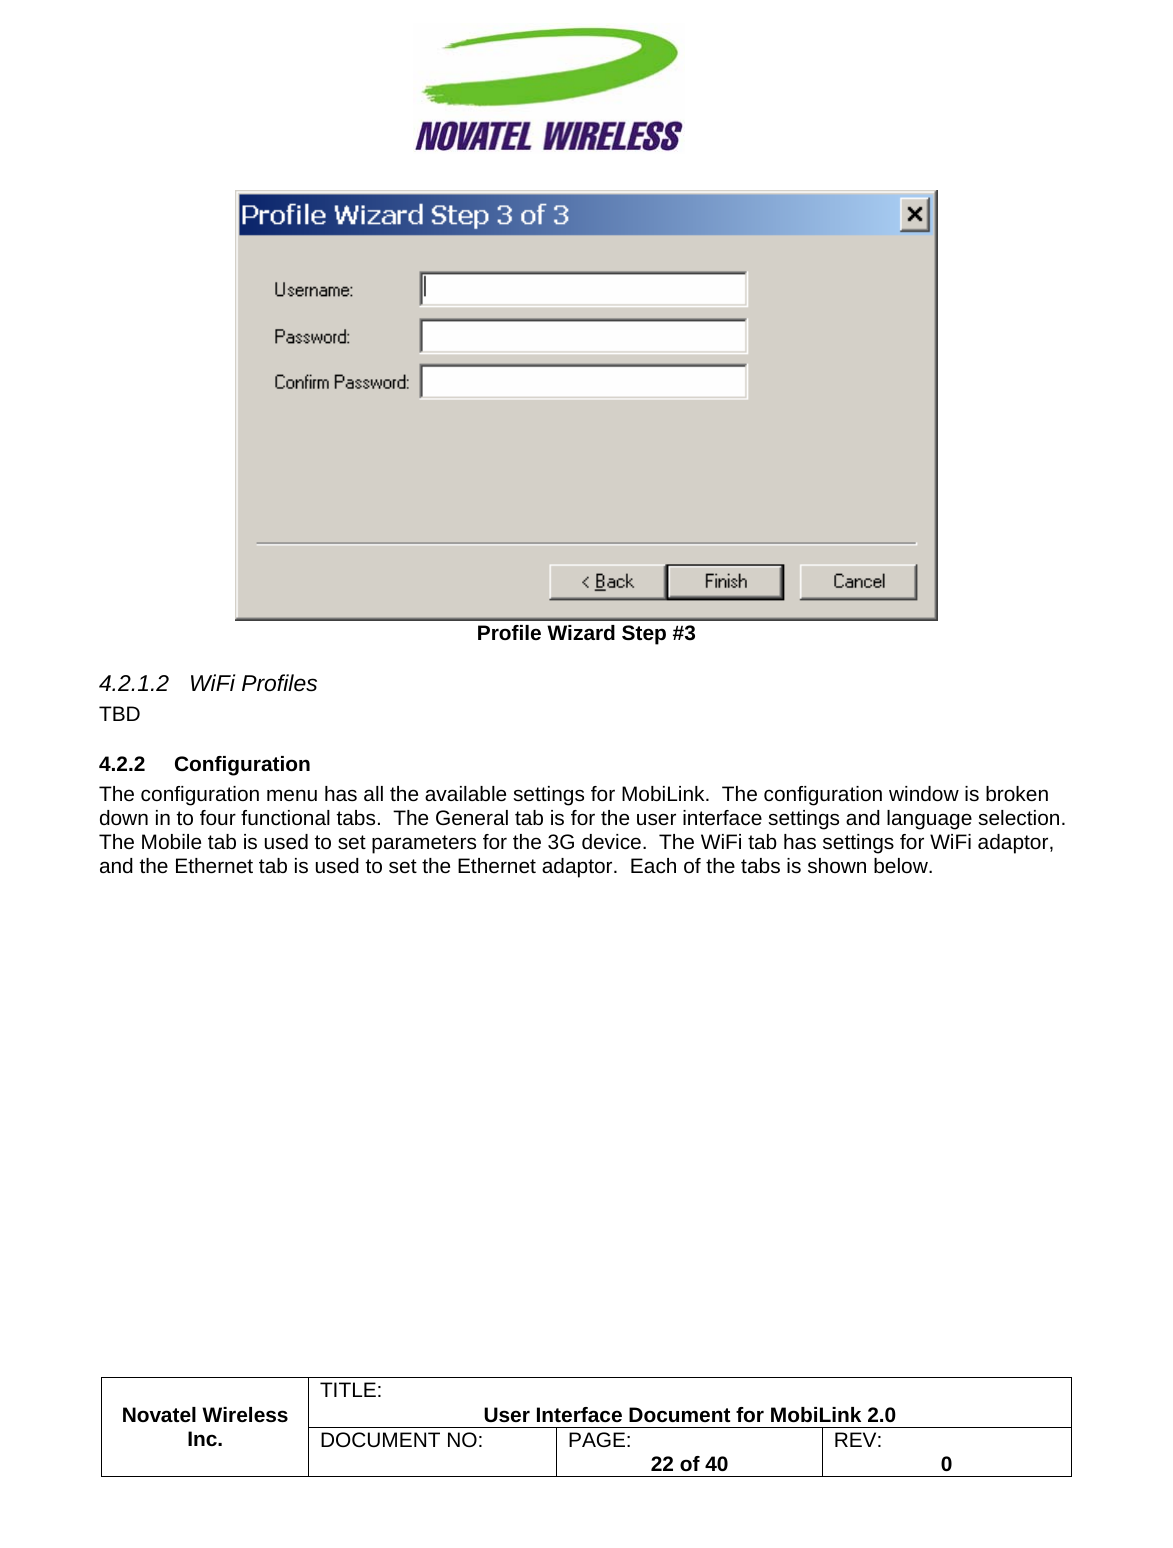                                                         TITLE:  User Interface Document for MobiLink 2.0  Profile Wizard Step #3 4.2.1.2 WiFi Profiles TBD 4.2.2 Configuration The configuration menu has all the available settings for MobiLink.  The configuration window is broken down in to four functional tabs.  The General tab is for the user interface settings and language selection.  The Mobile tab is used to set parameters for the 3G device.  The WiFi tab has settings for WiFi adaptor, and the Ethernet tab is used to set the Ethernet adaptor.  Each of the tabs is shown below. Novatel Wireless  Inc. DOCUMENT NO:  PAGE:   22 of 40  REV:  0    